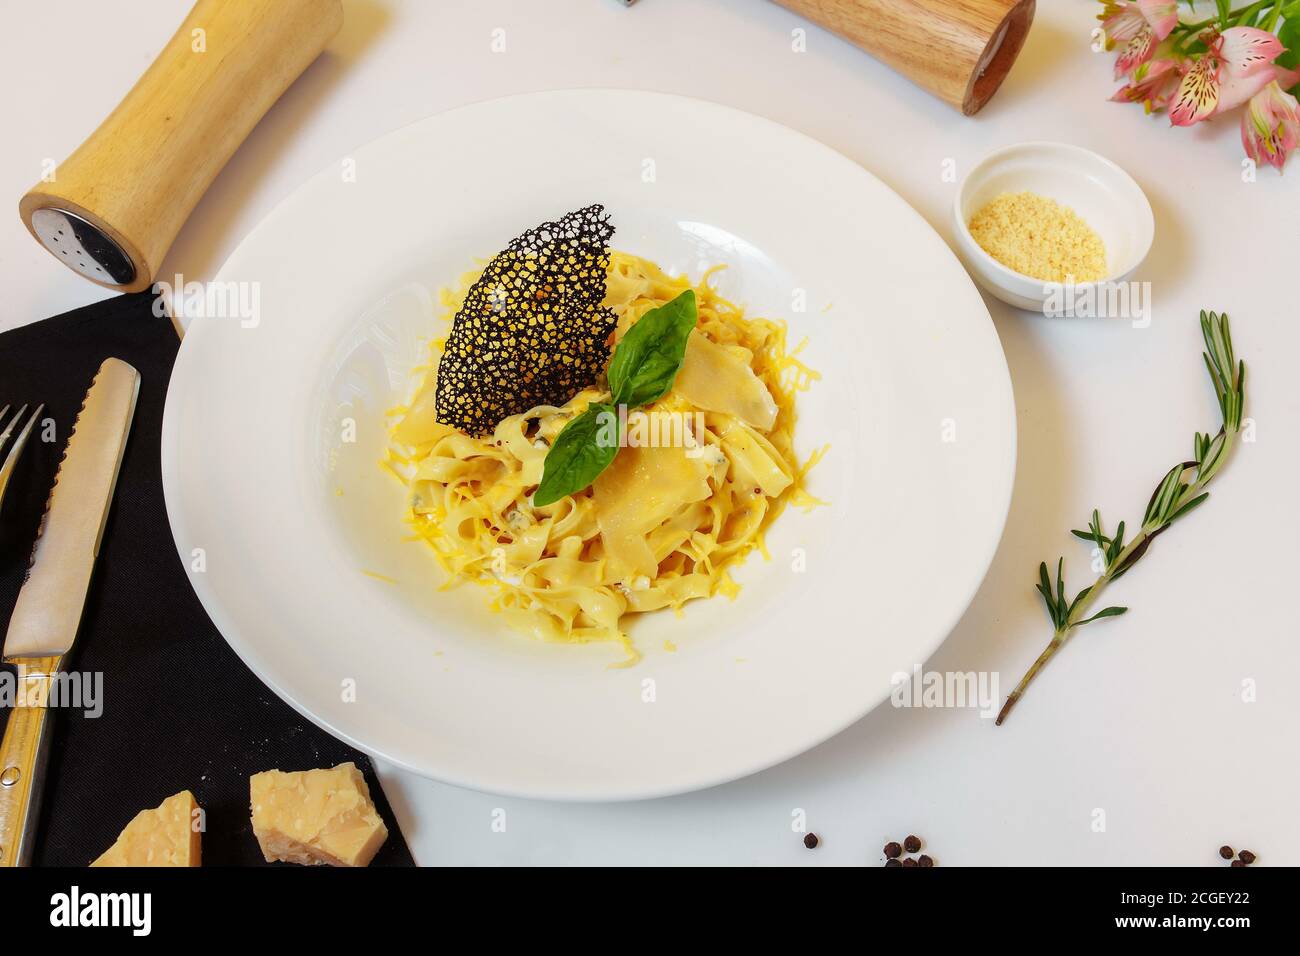 Pasta four cheeses. Homemade pasta, cream cheese sauce, Dor Blue, Cheddar, Parmesan, basil. Italian food. On a wooden background. Free space for text Stock Photo